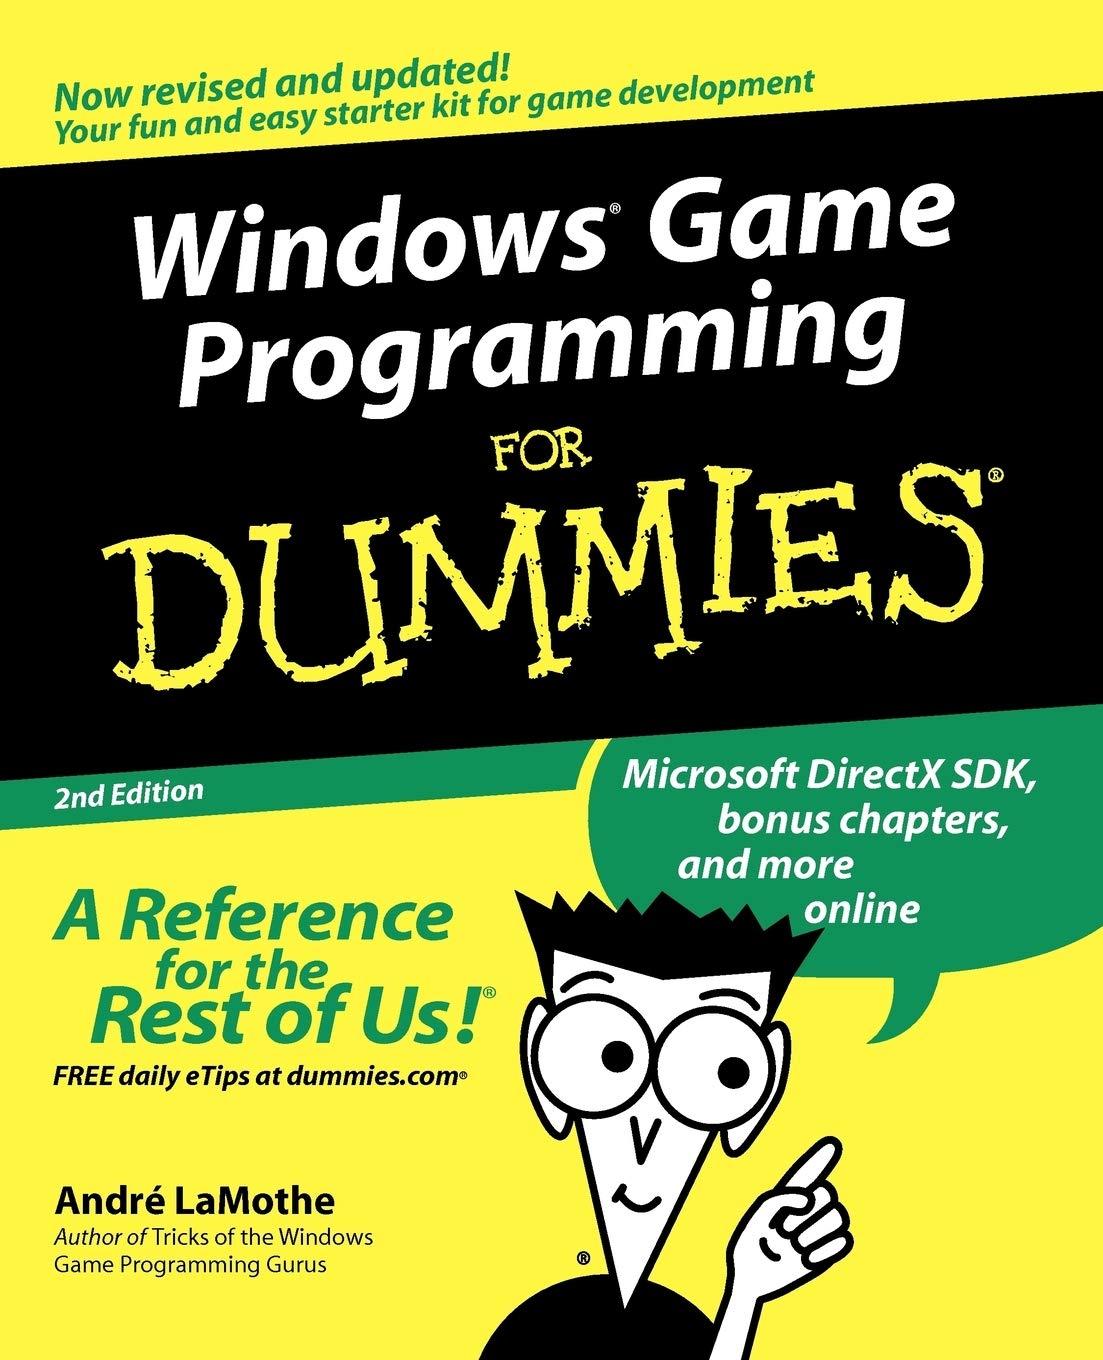 windows game programming for dummies 2nd edition andré lamothe 0764516787, 978-0764516788